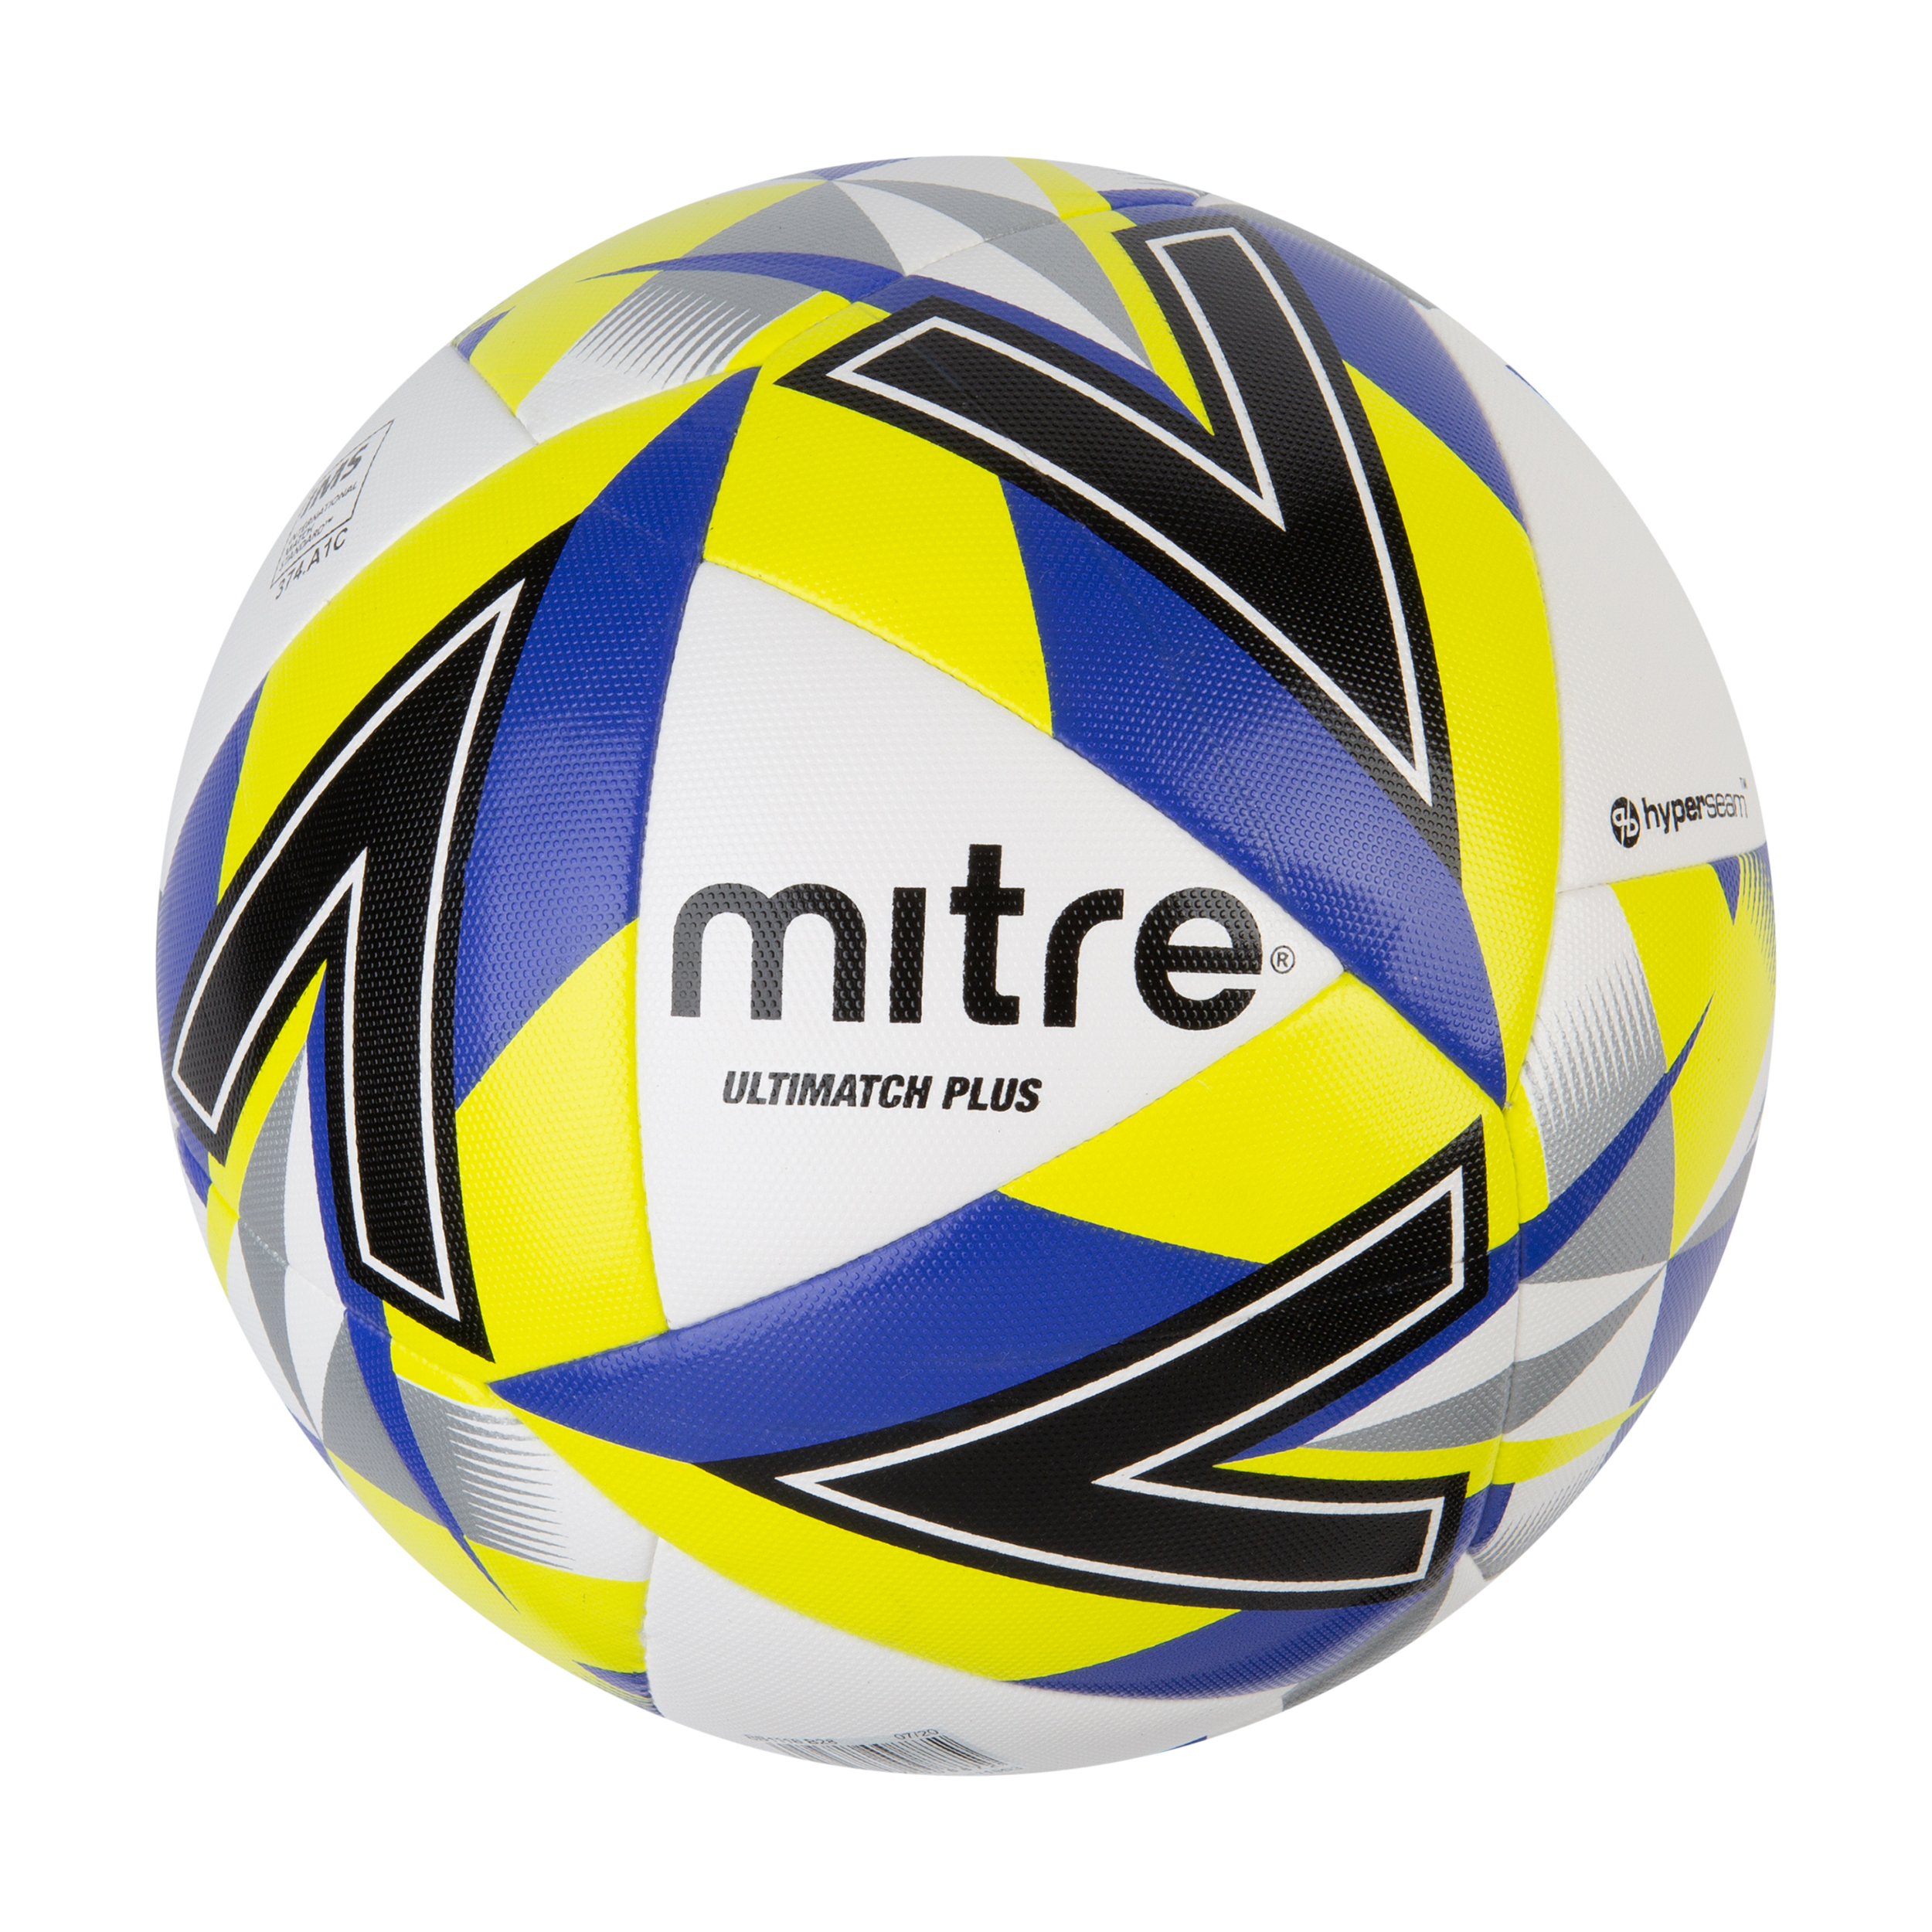 Mitre Ultimatch Plus Fball-WT/YL/BL-4